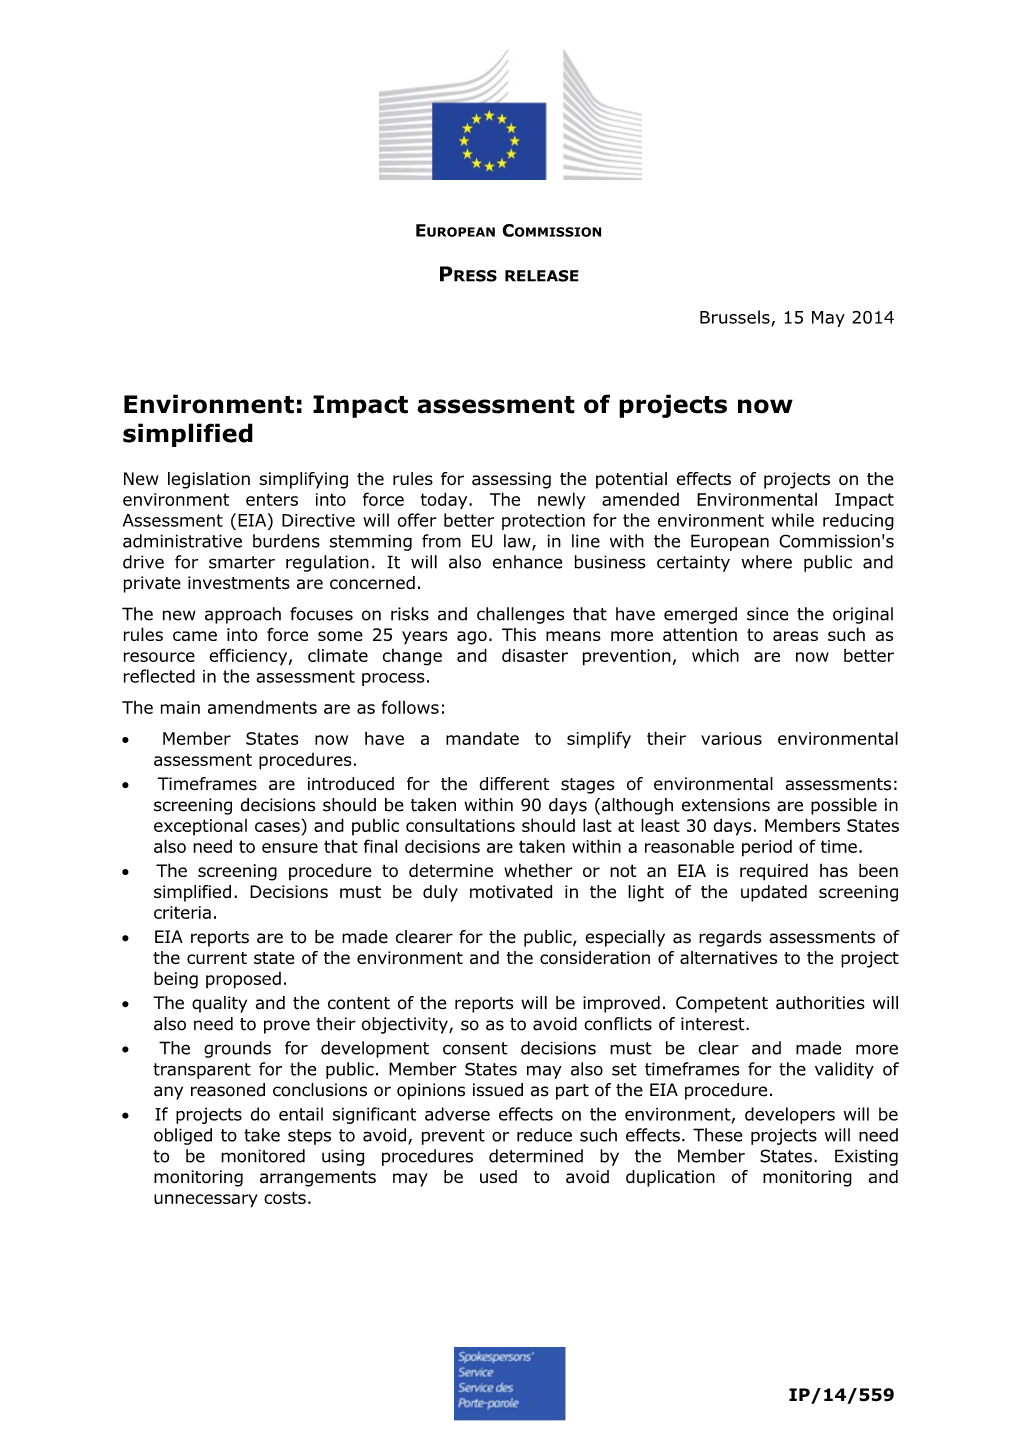 Environment: Impact Assessment of Projects Nowsimplified